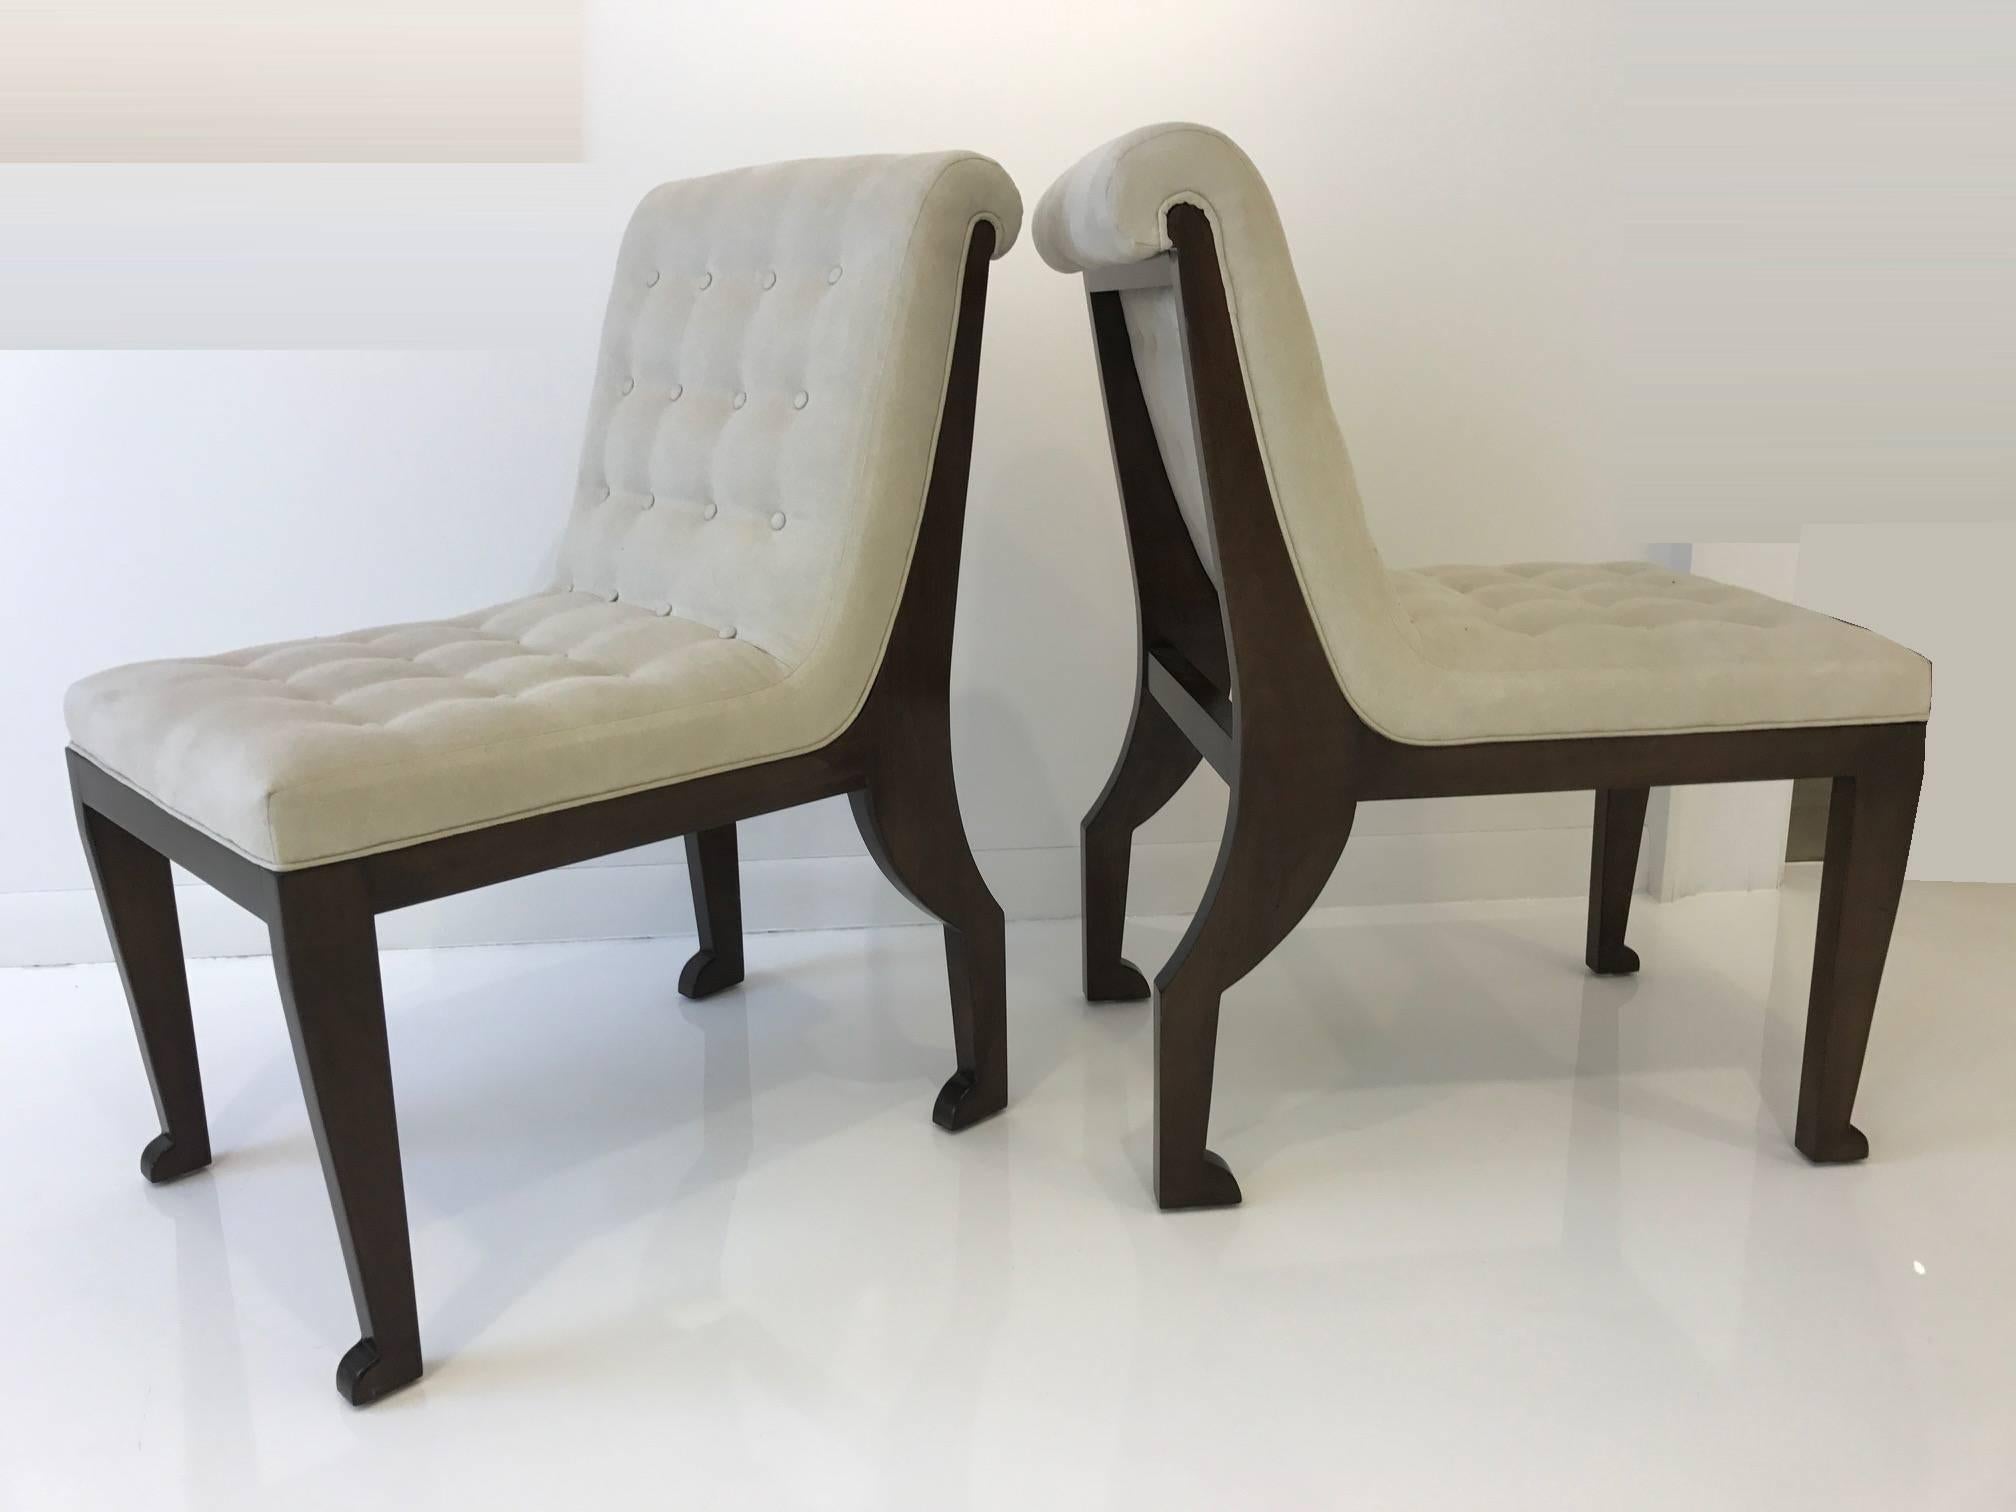 French modern Neoclassical style slipper chairs in the manner of  Marc du Plantier, circa 1980. Newly upholstered with suede, dark stained mahogany.
FREE SHIPPING: White Glove to Continental US.